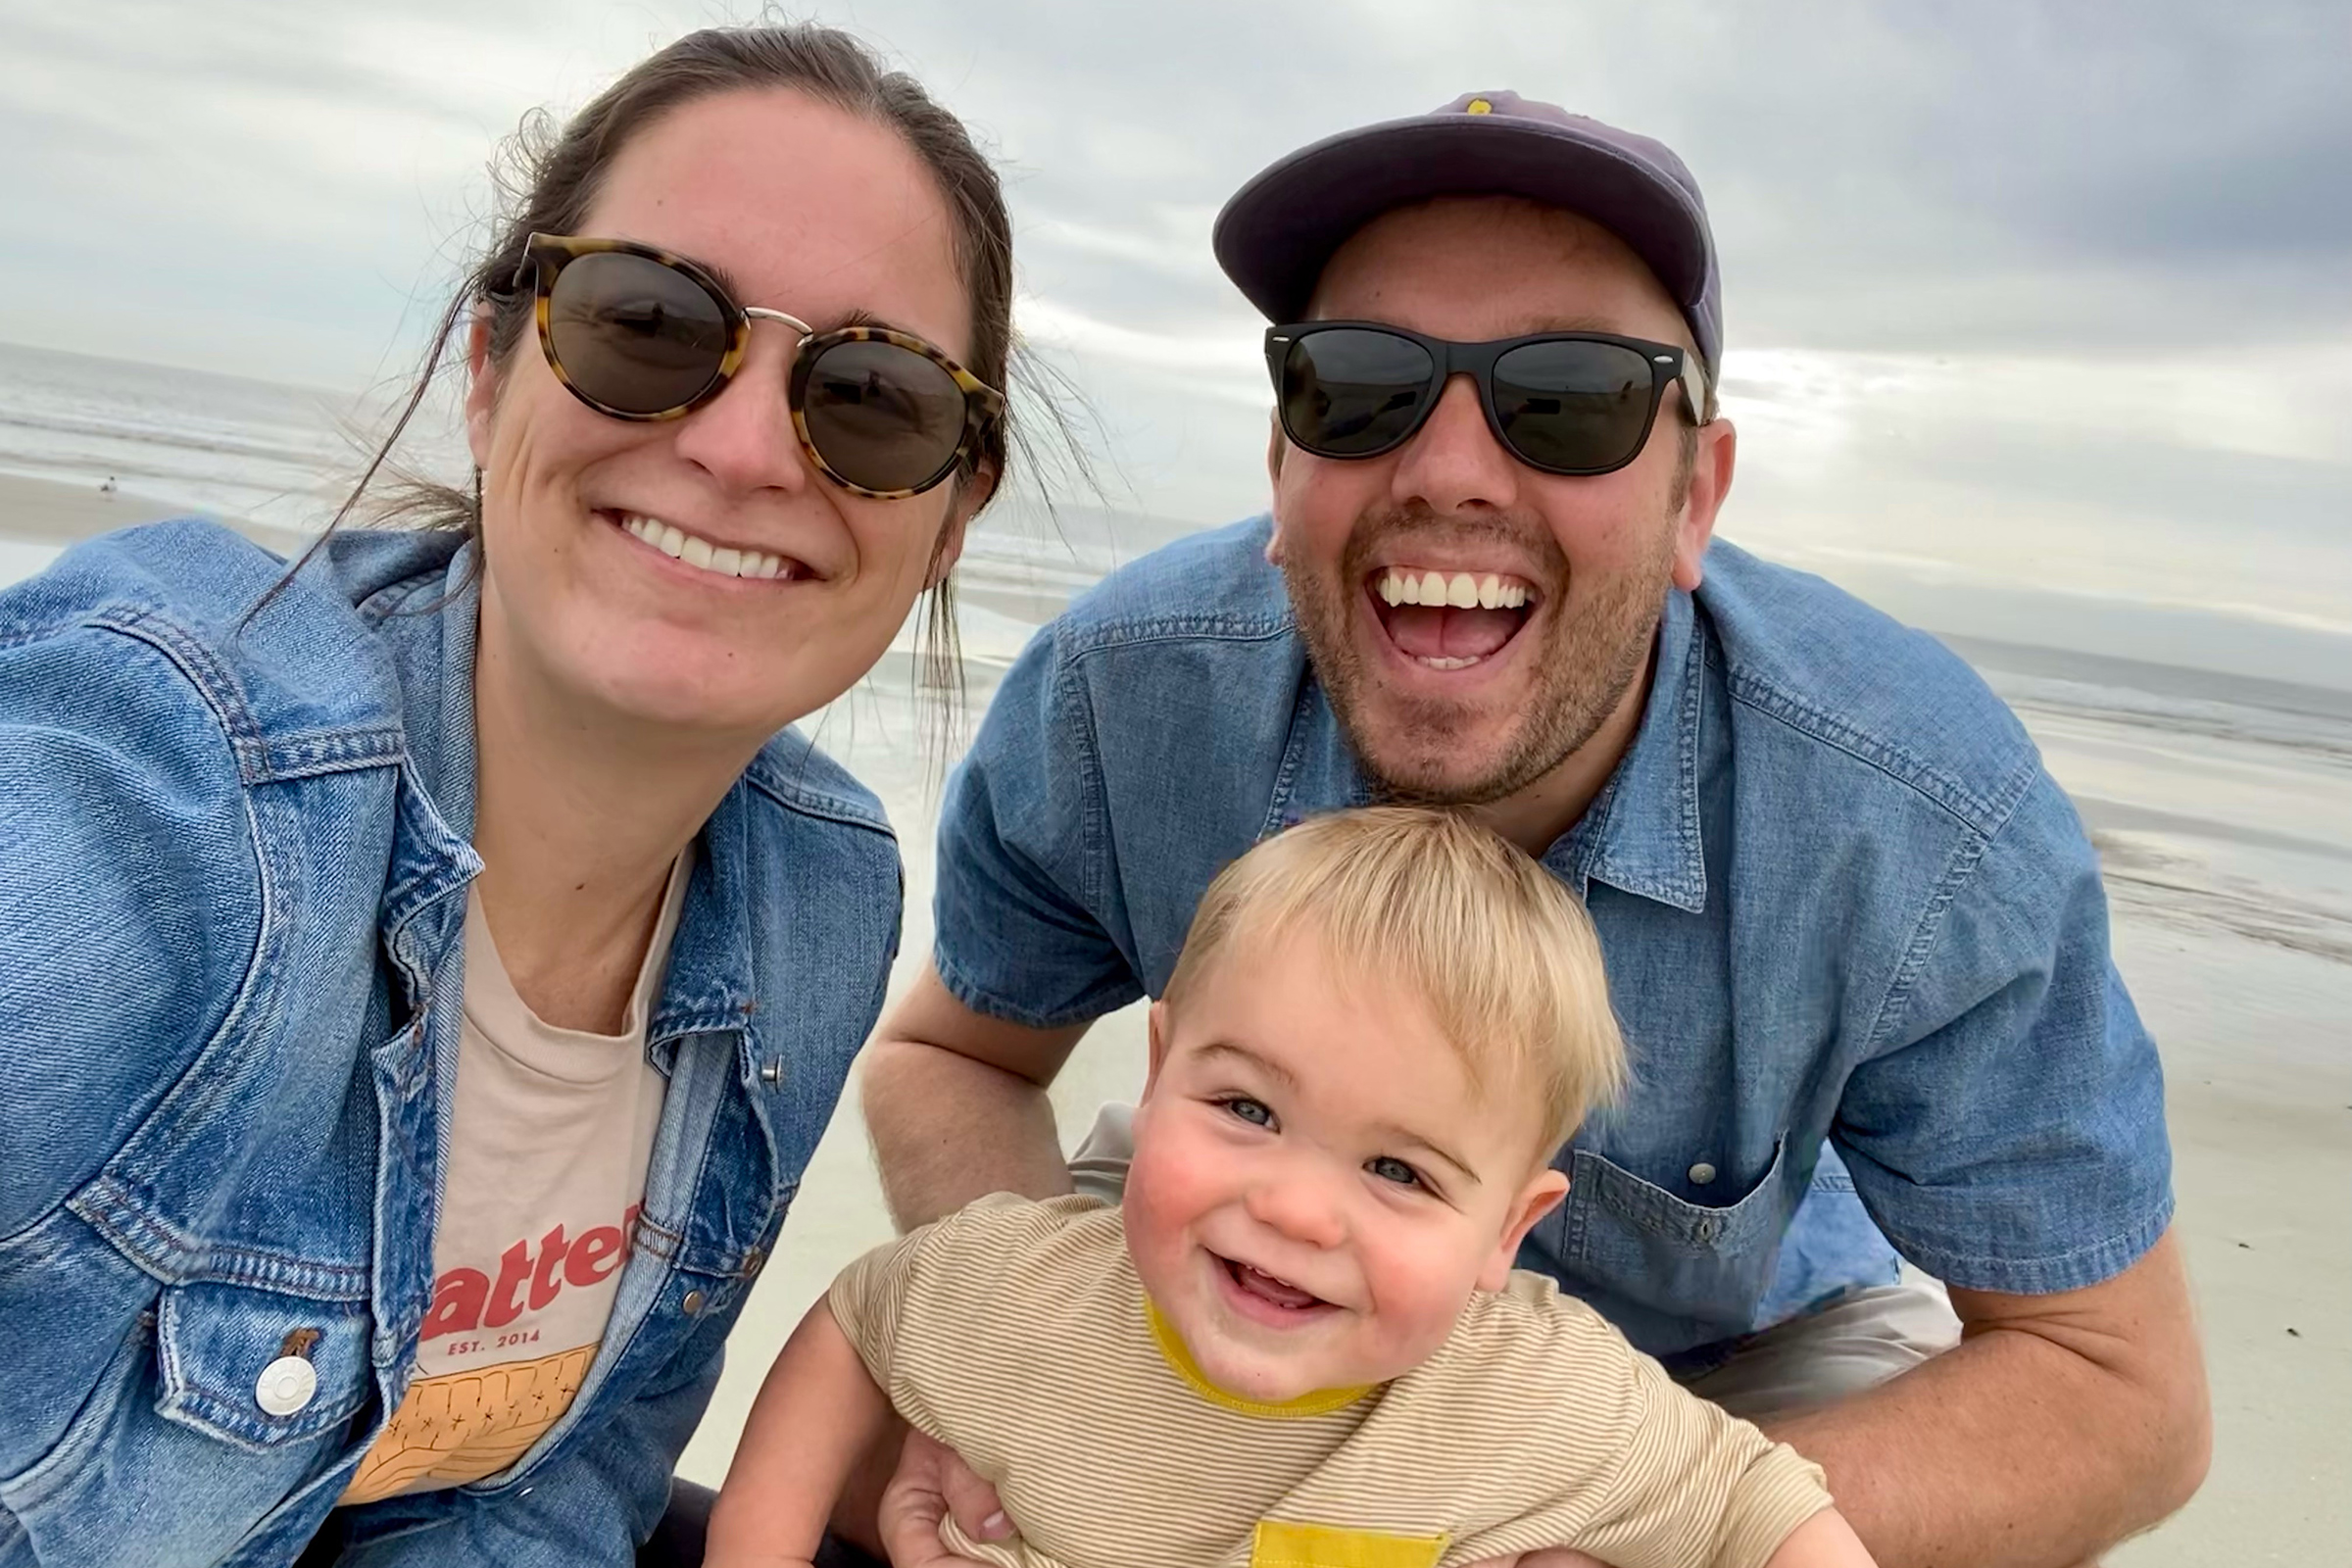 Stephanie, her husband and her son taking a selfie on the beach.